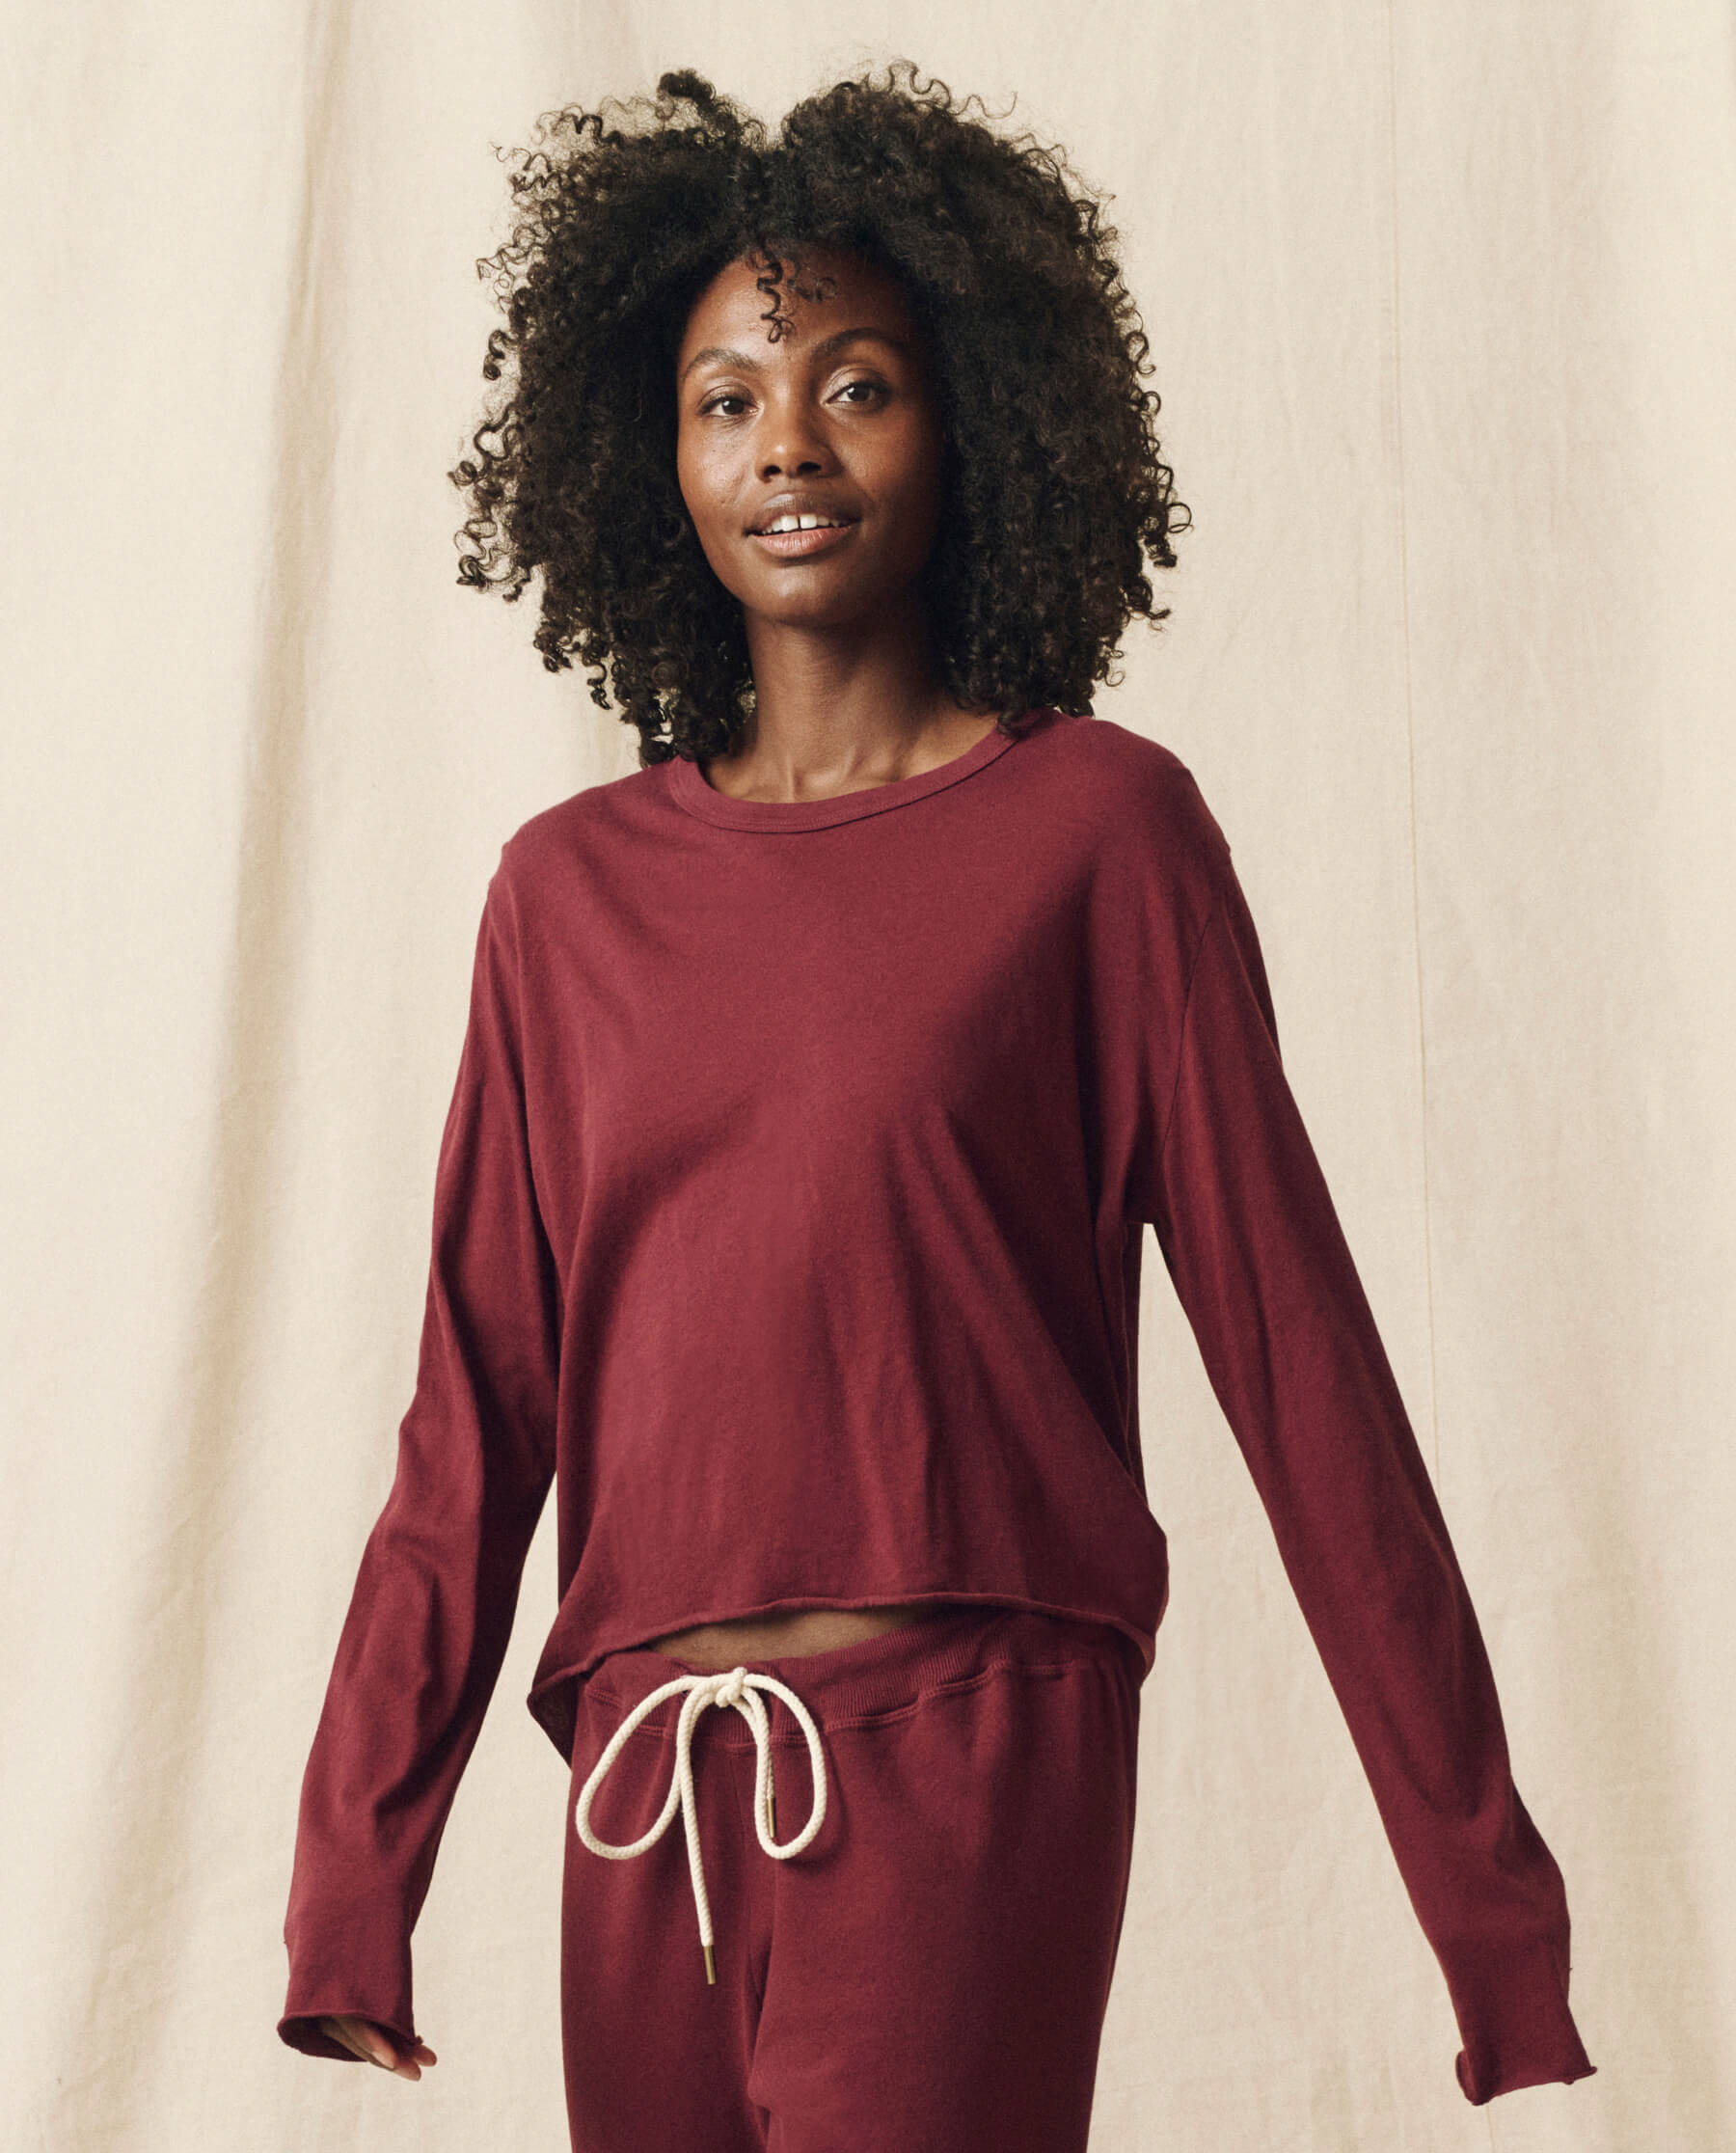 The Long Sleeve Crop Tee. Solid -- Mulled Wine TEES THE GREAT. HOL 23 KNITS